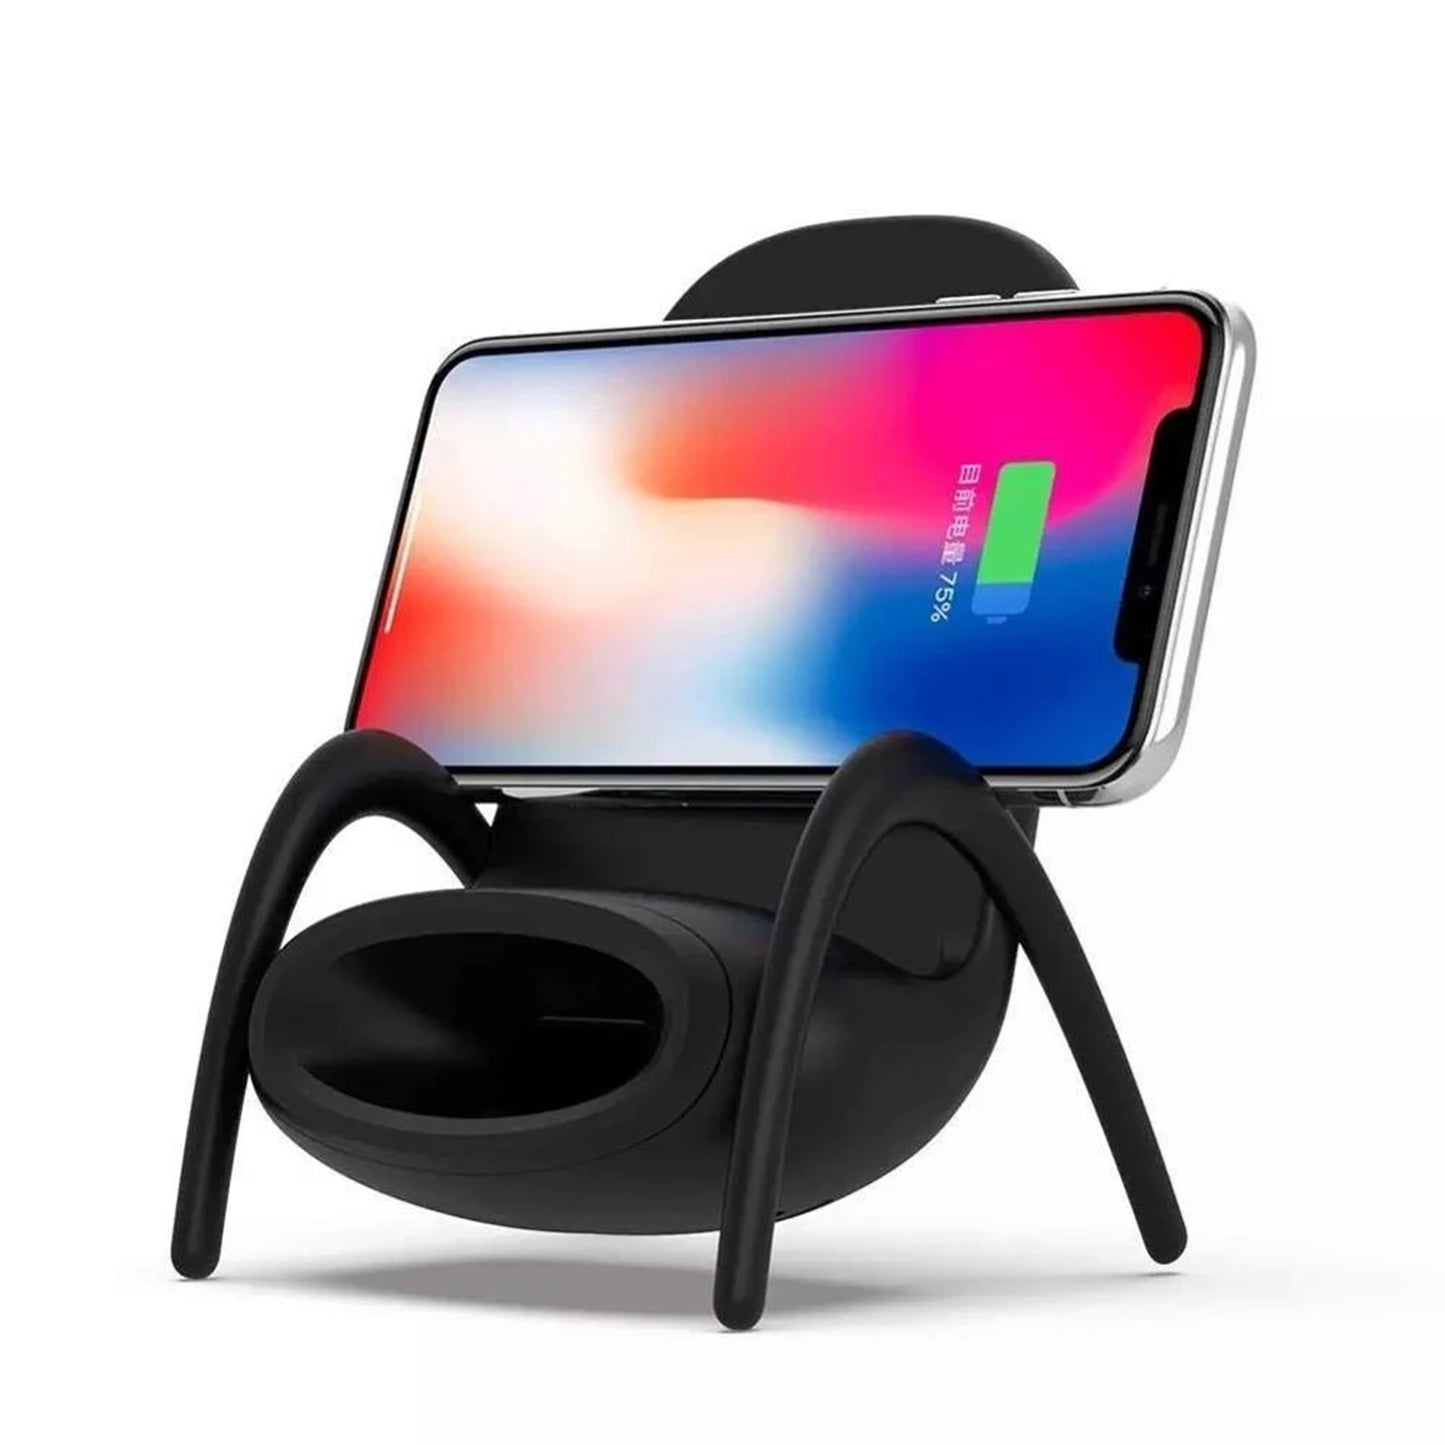  Portable Mini Chair Wireless Charger Supply For All Phones Multipurpose Phone Stand With Musical Speaker Function Charger Emporium Discounts 5 Daily Products Or Gadgets 